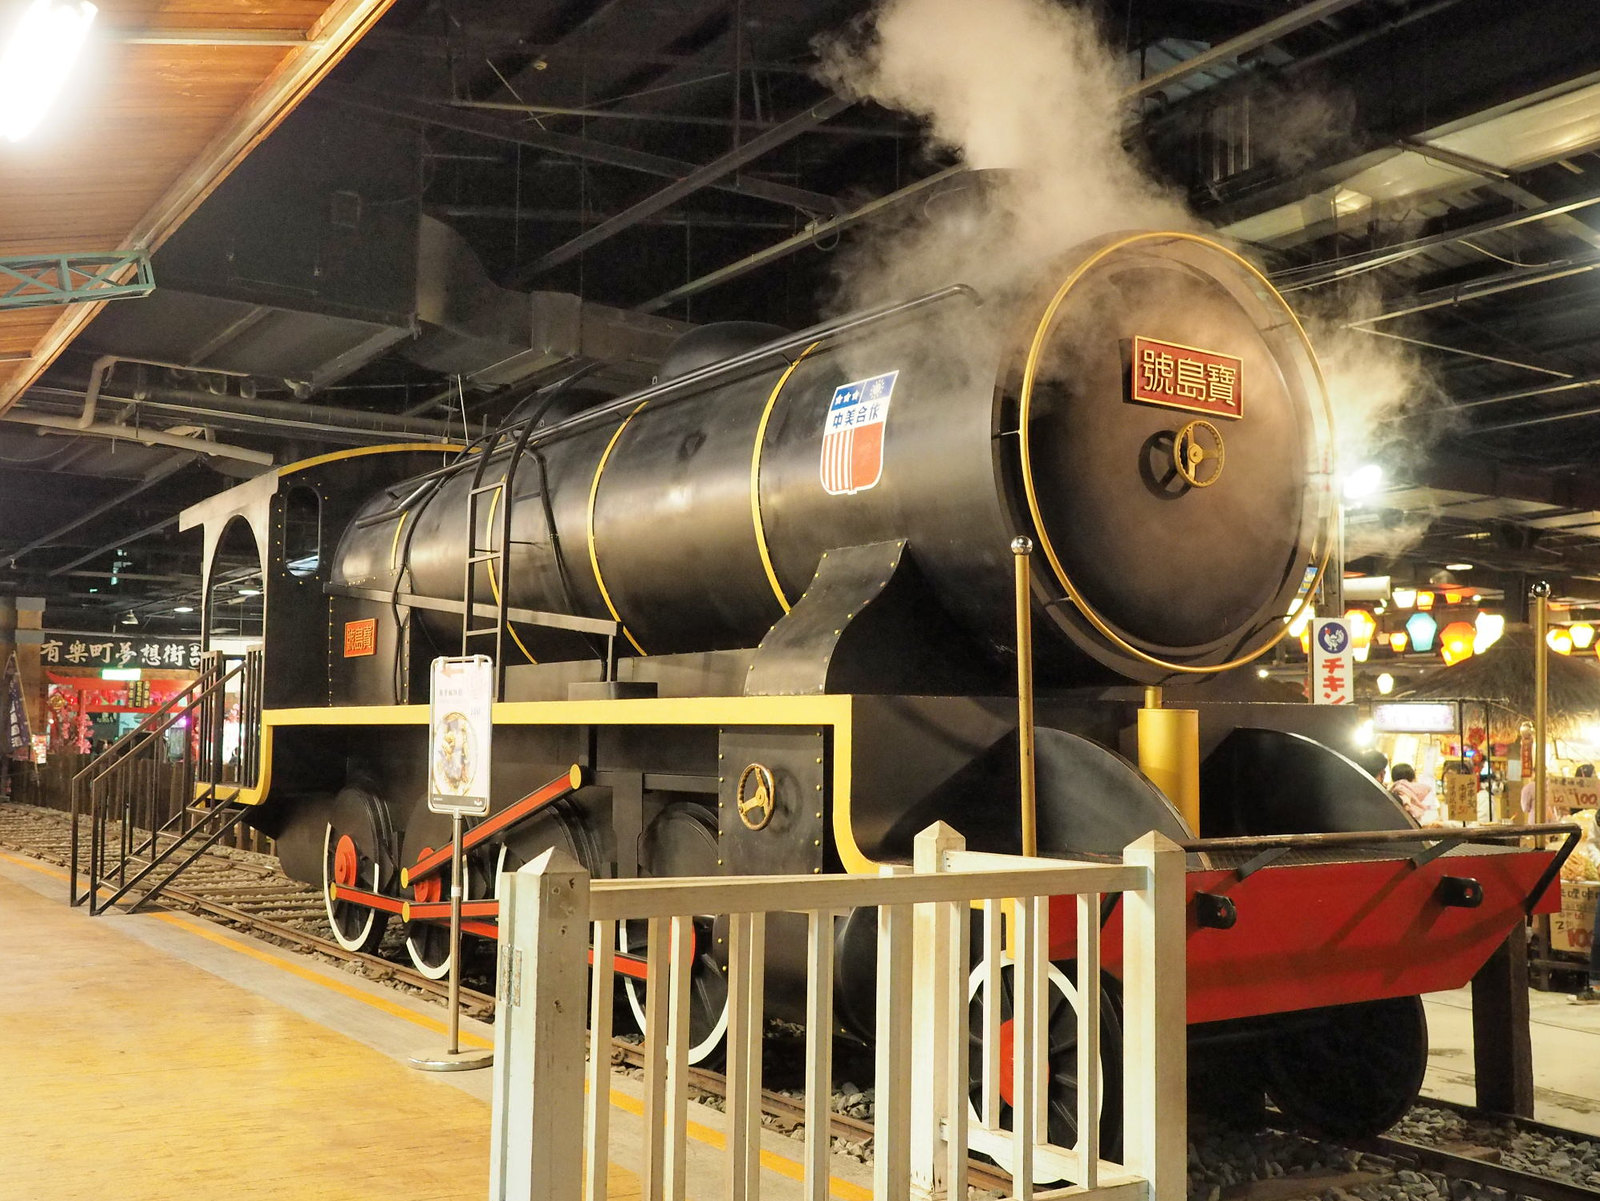 One of the main attractions at Taiwan Times Village (寶島時代村), the steam train.